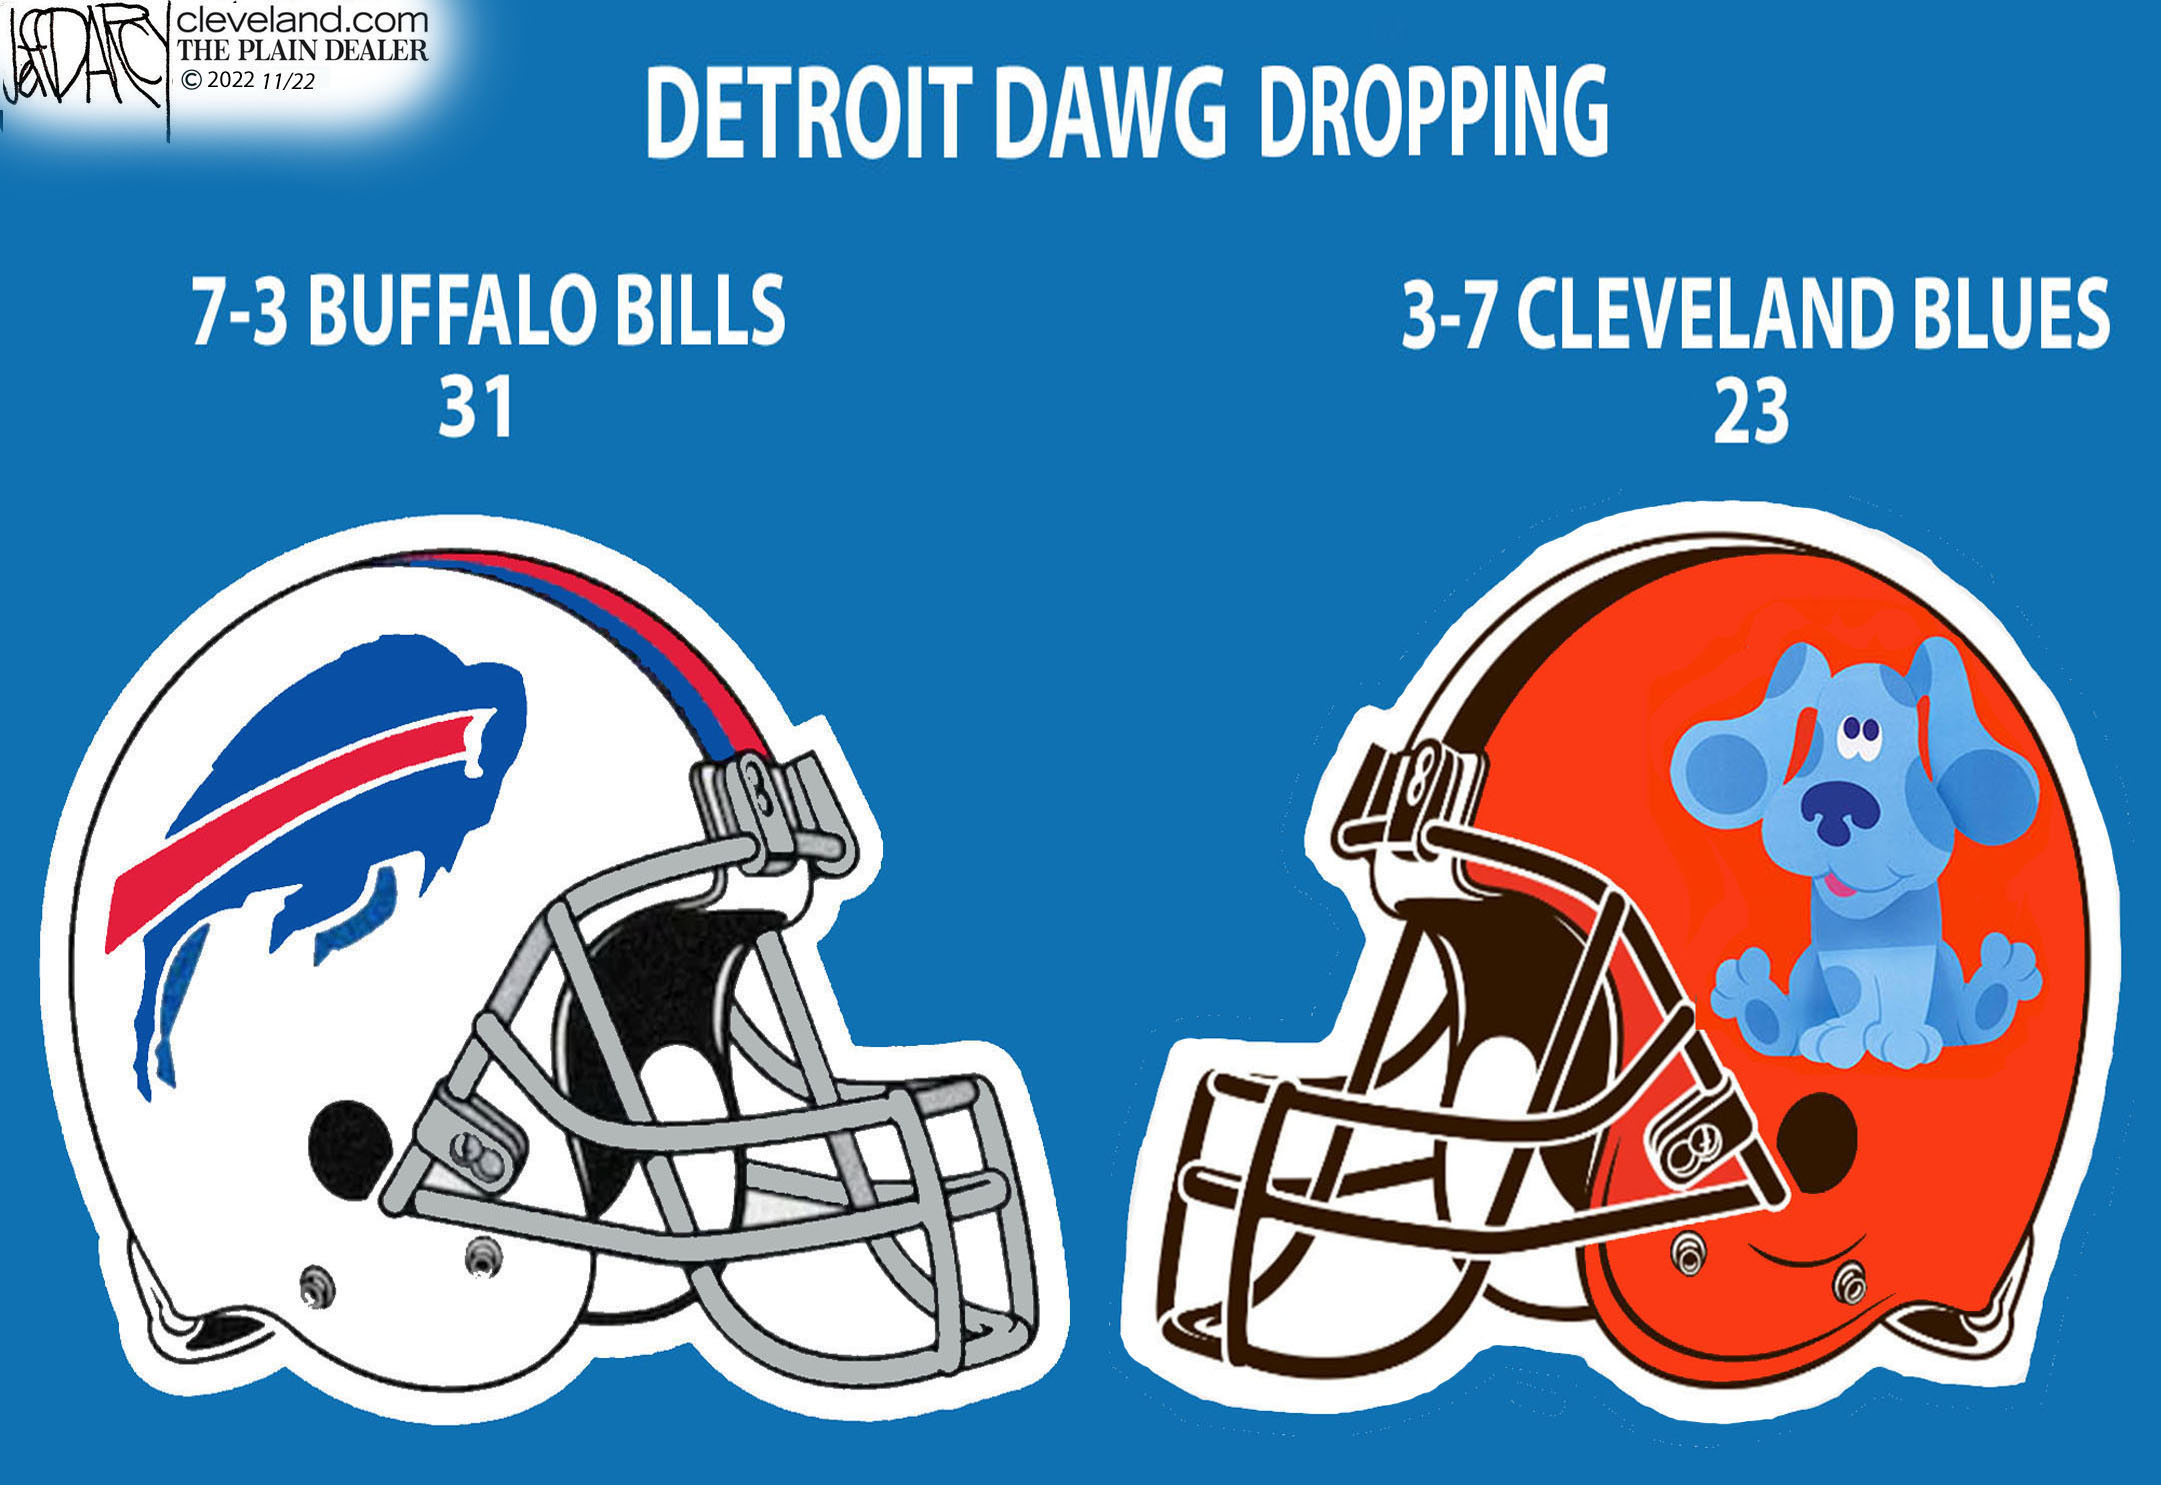 Cleveland Browns vs. Buffalo Bills in Detroit: How to buy tickets